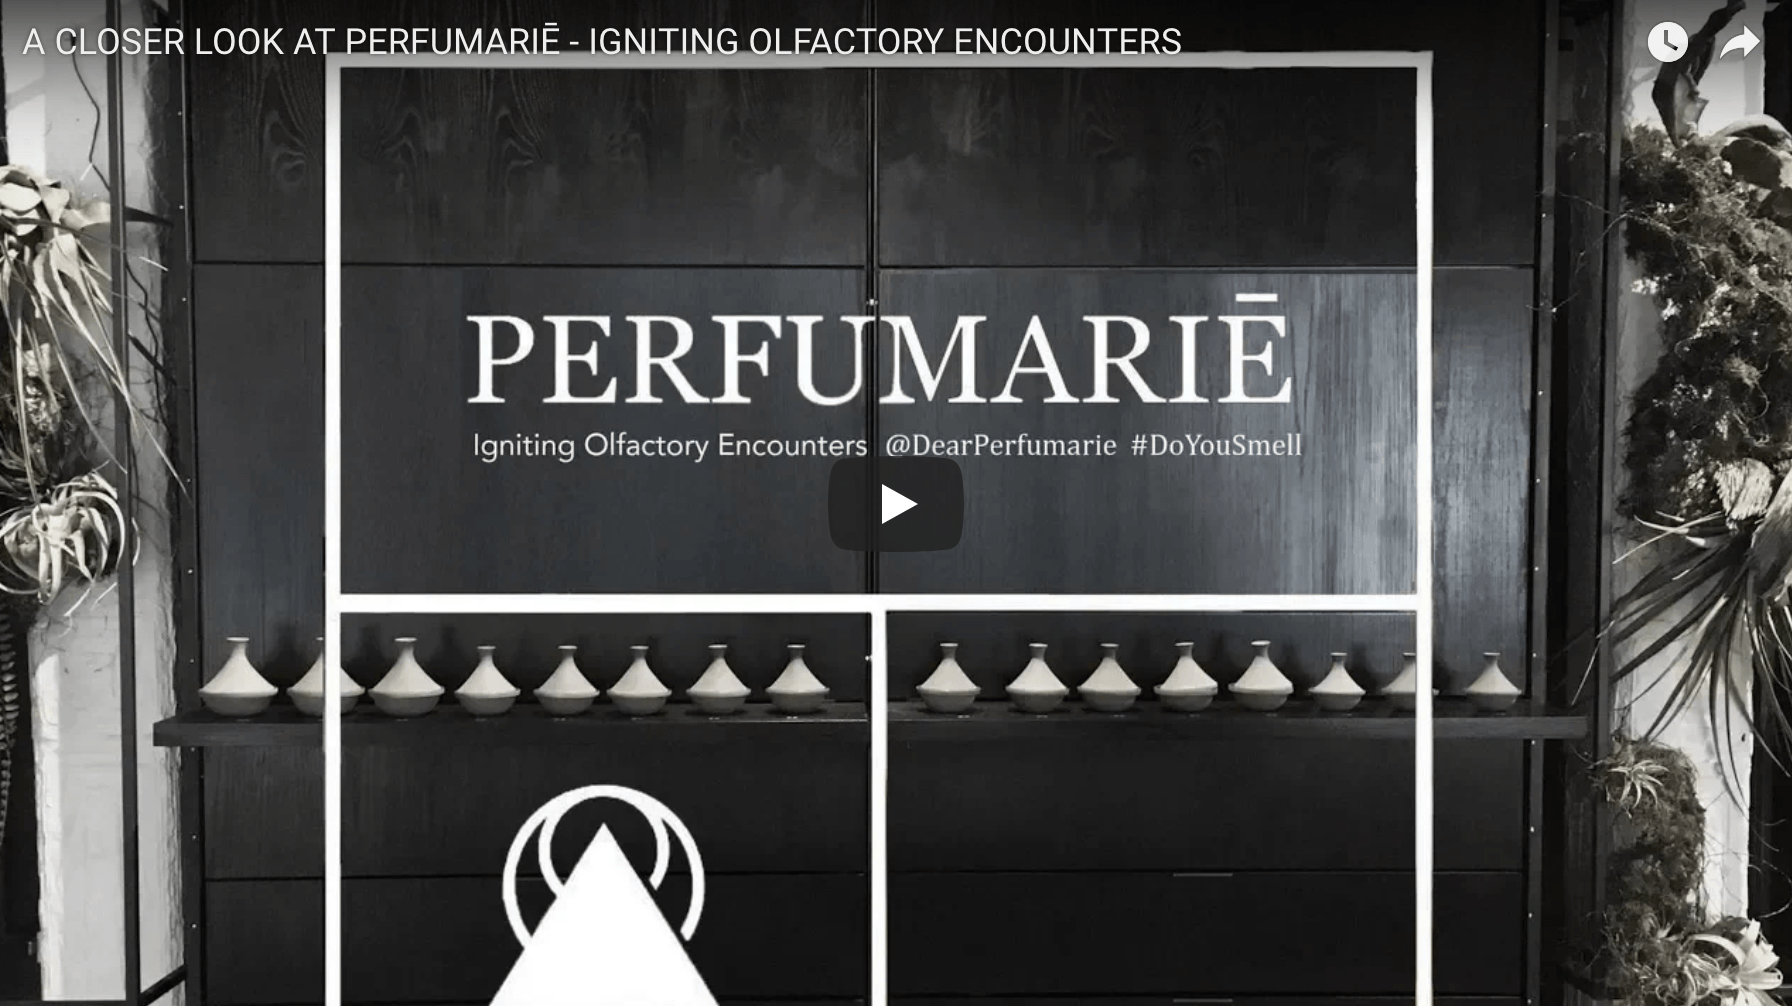 @JoeScentME's Closer Look at Perfumarie Scented Notes by Perfumarie